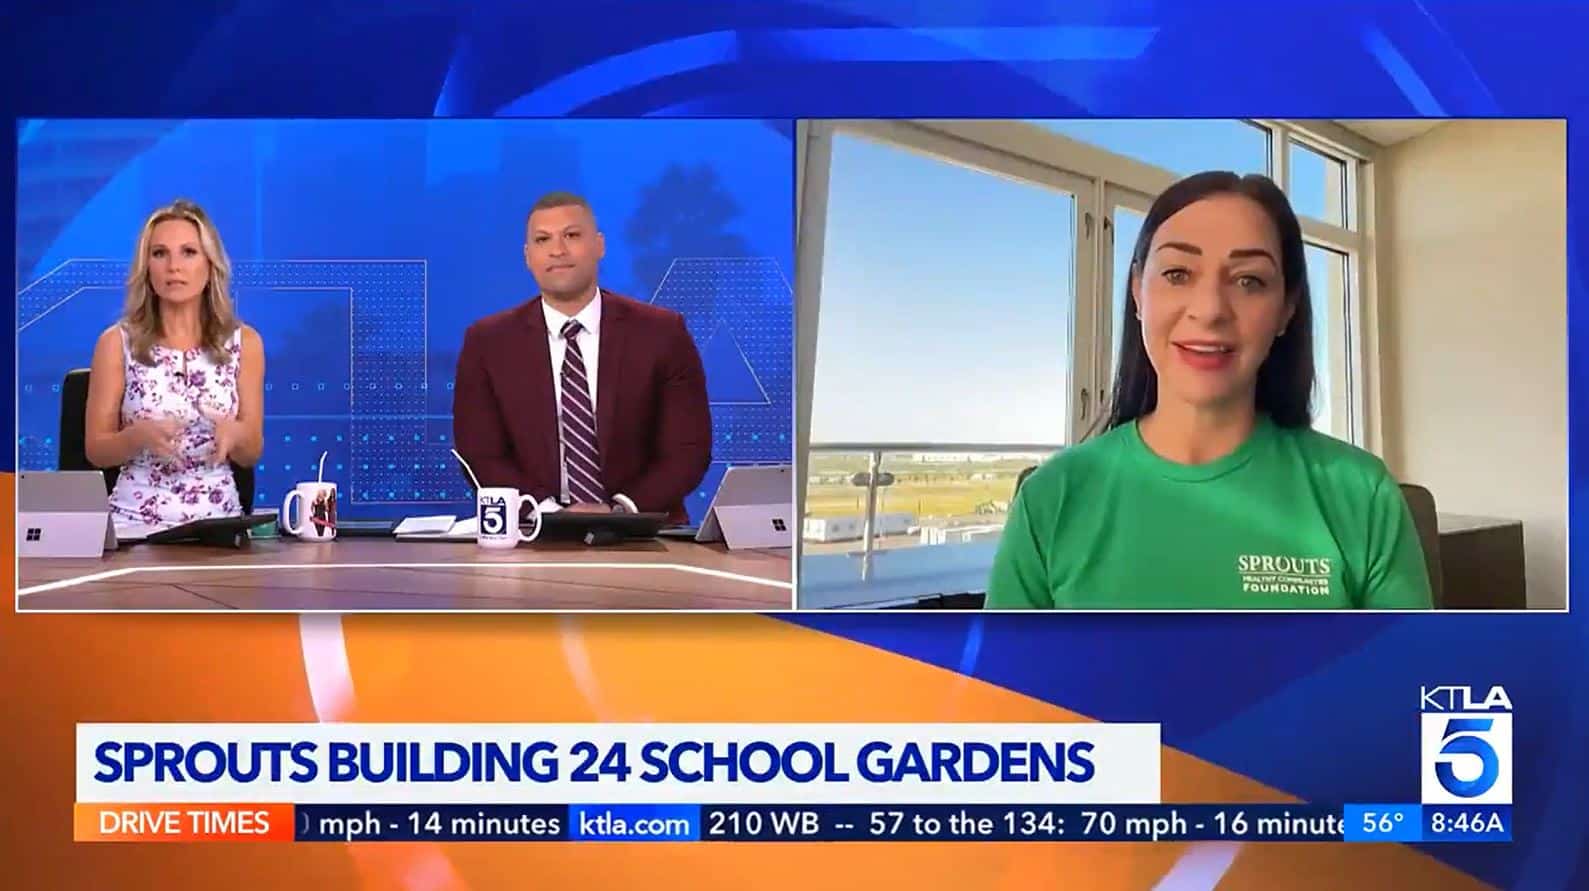 Los Angeles KTLA News interview with Sprouts discussing benefits of school gardens